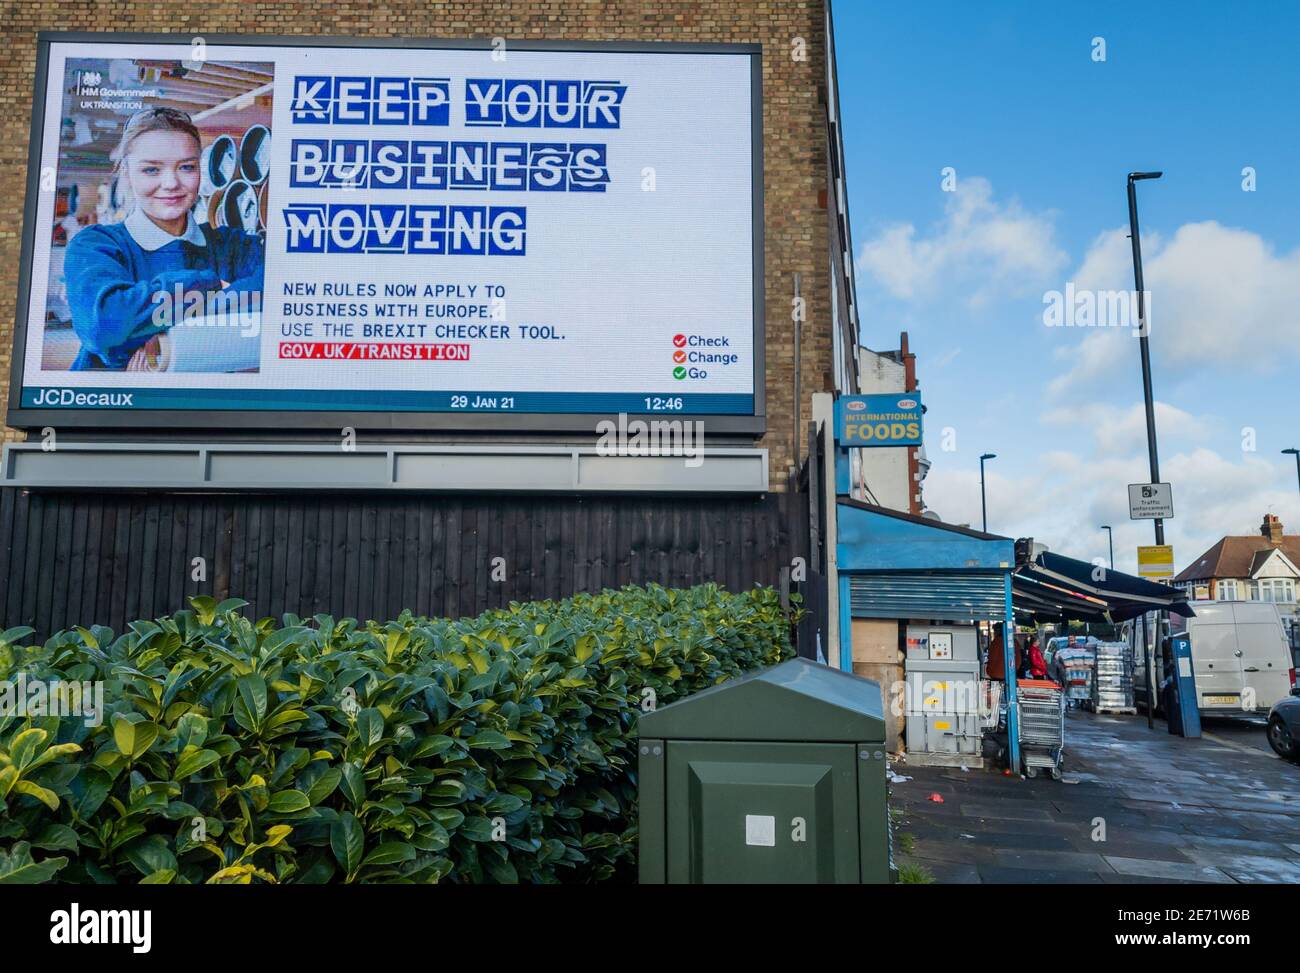 A government billboard advertisement informing British companies trading with the European Union of new trading rules after Brexit. Stock Photo